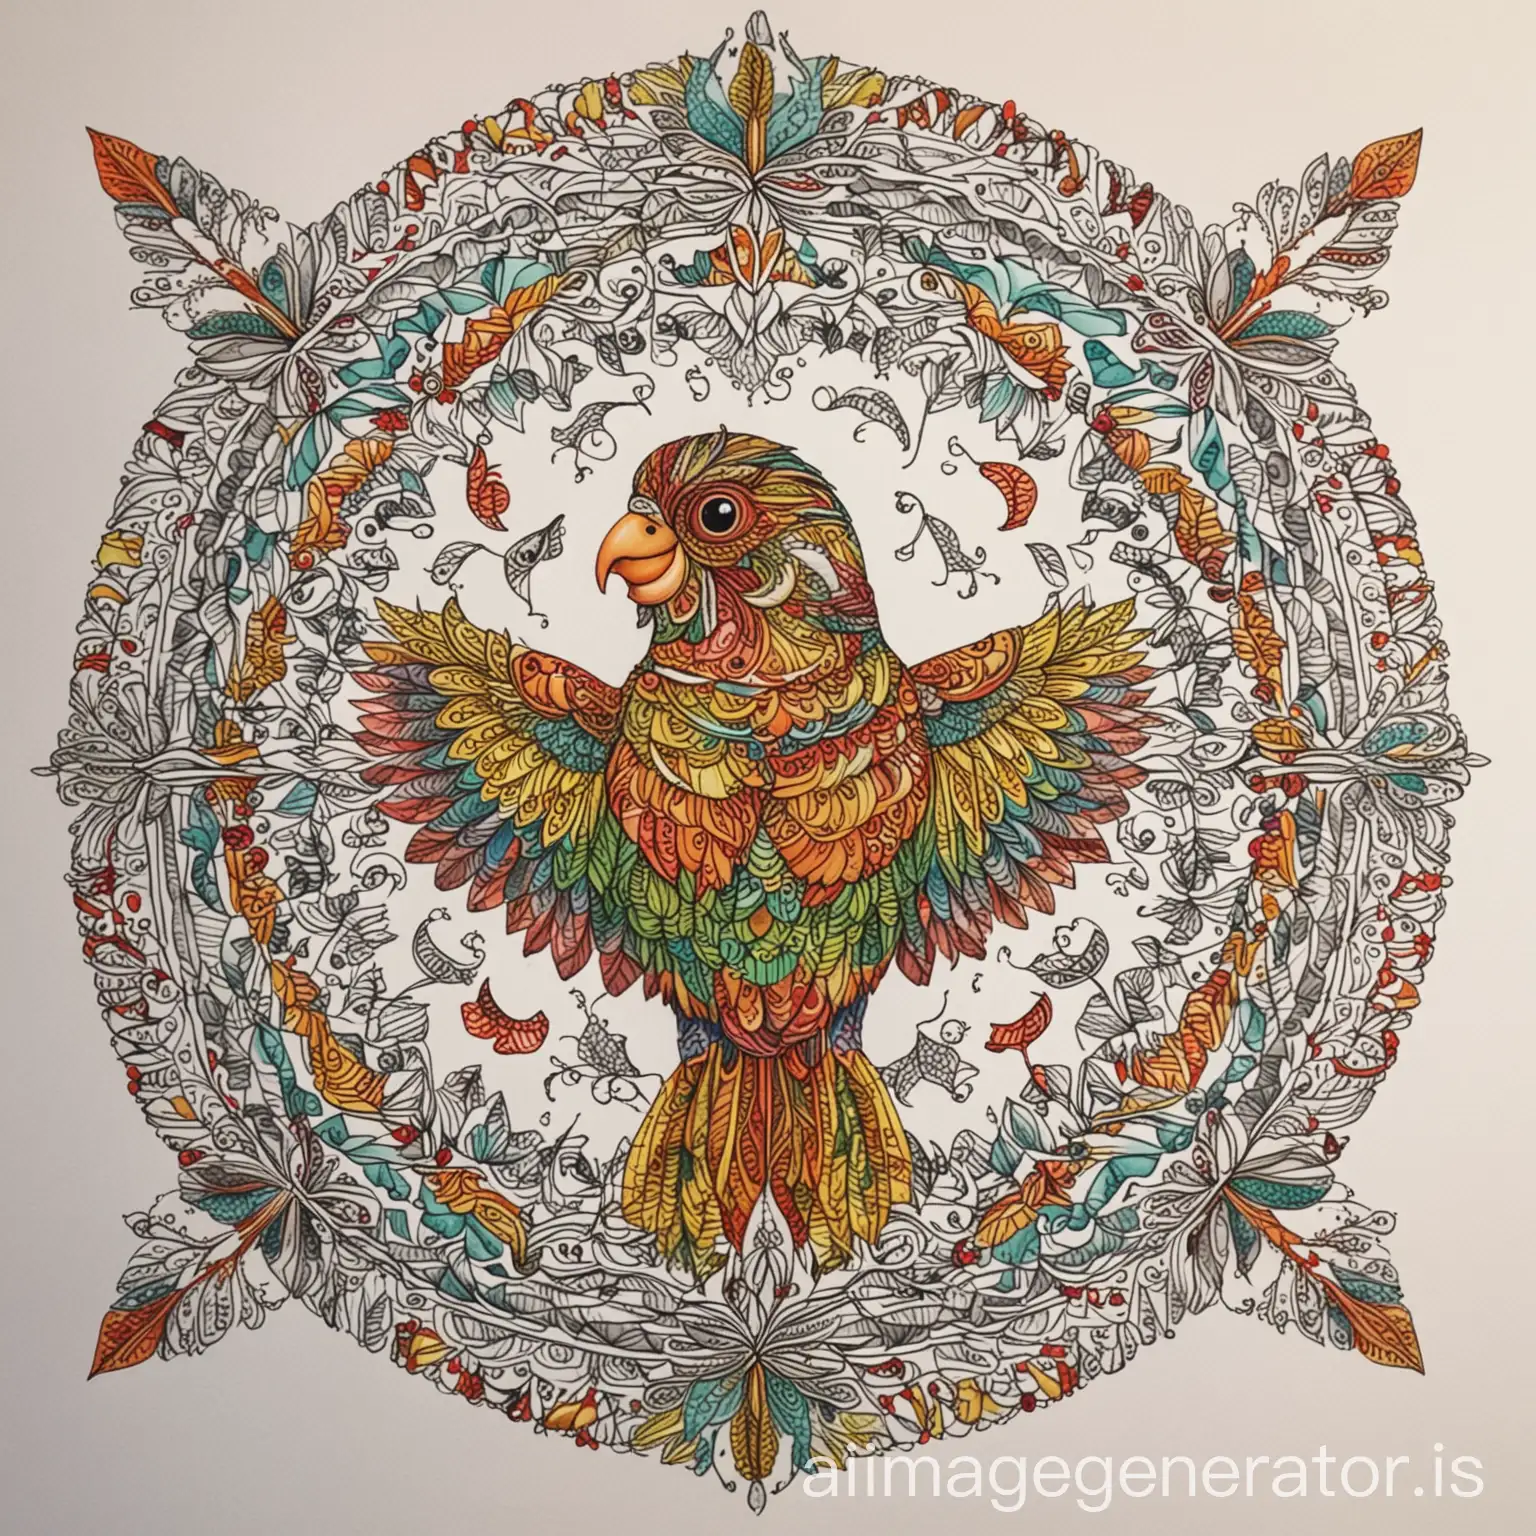 Exquisite-Fine-Line-Parrot-Mandala-Coloring-Sheet-for-Adults